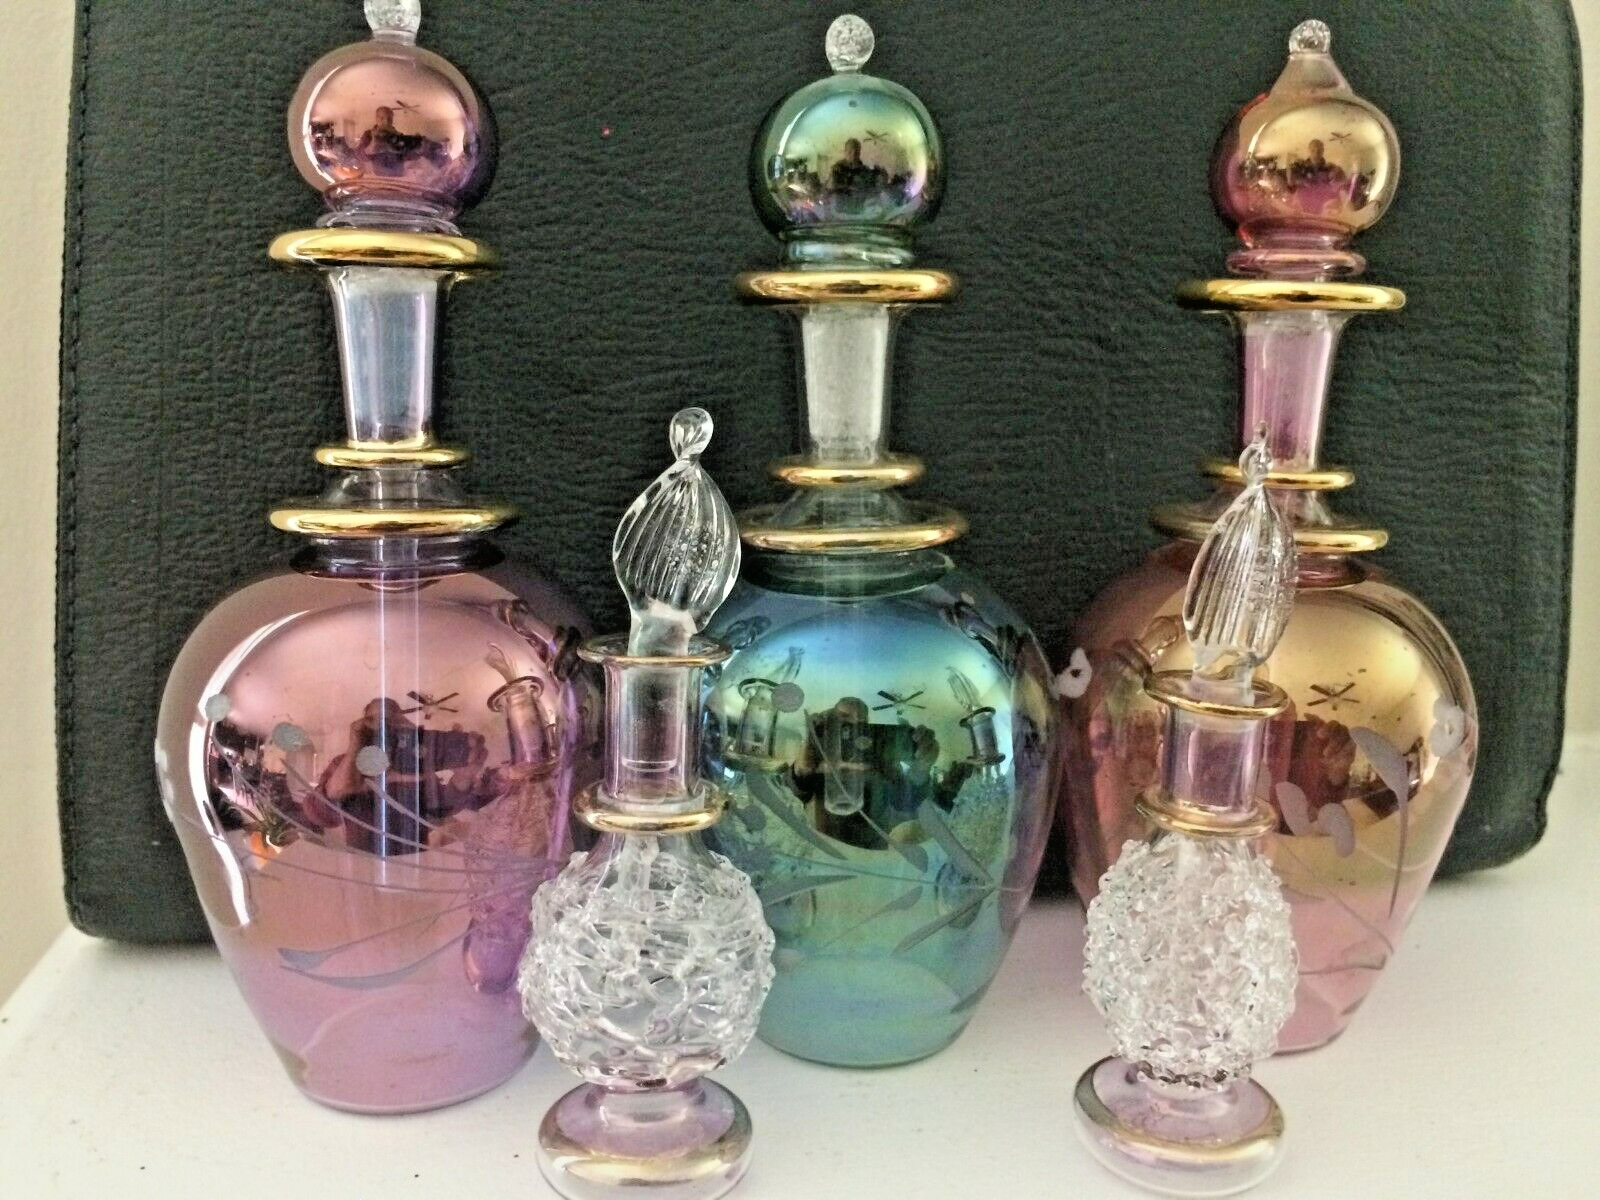 New Set of 5 Egyptian Perfume Bottles Pyrex Glass (Winter Collection)